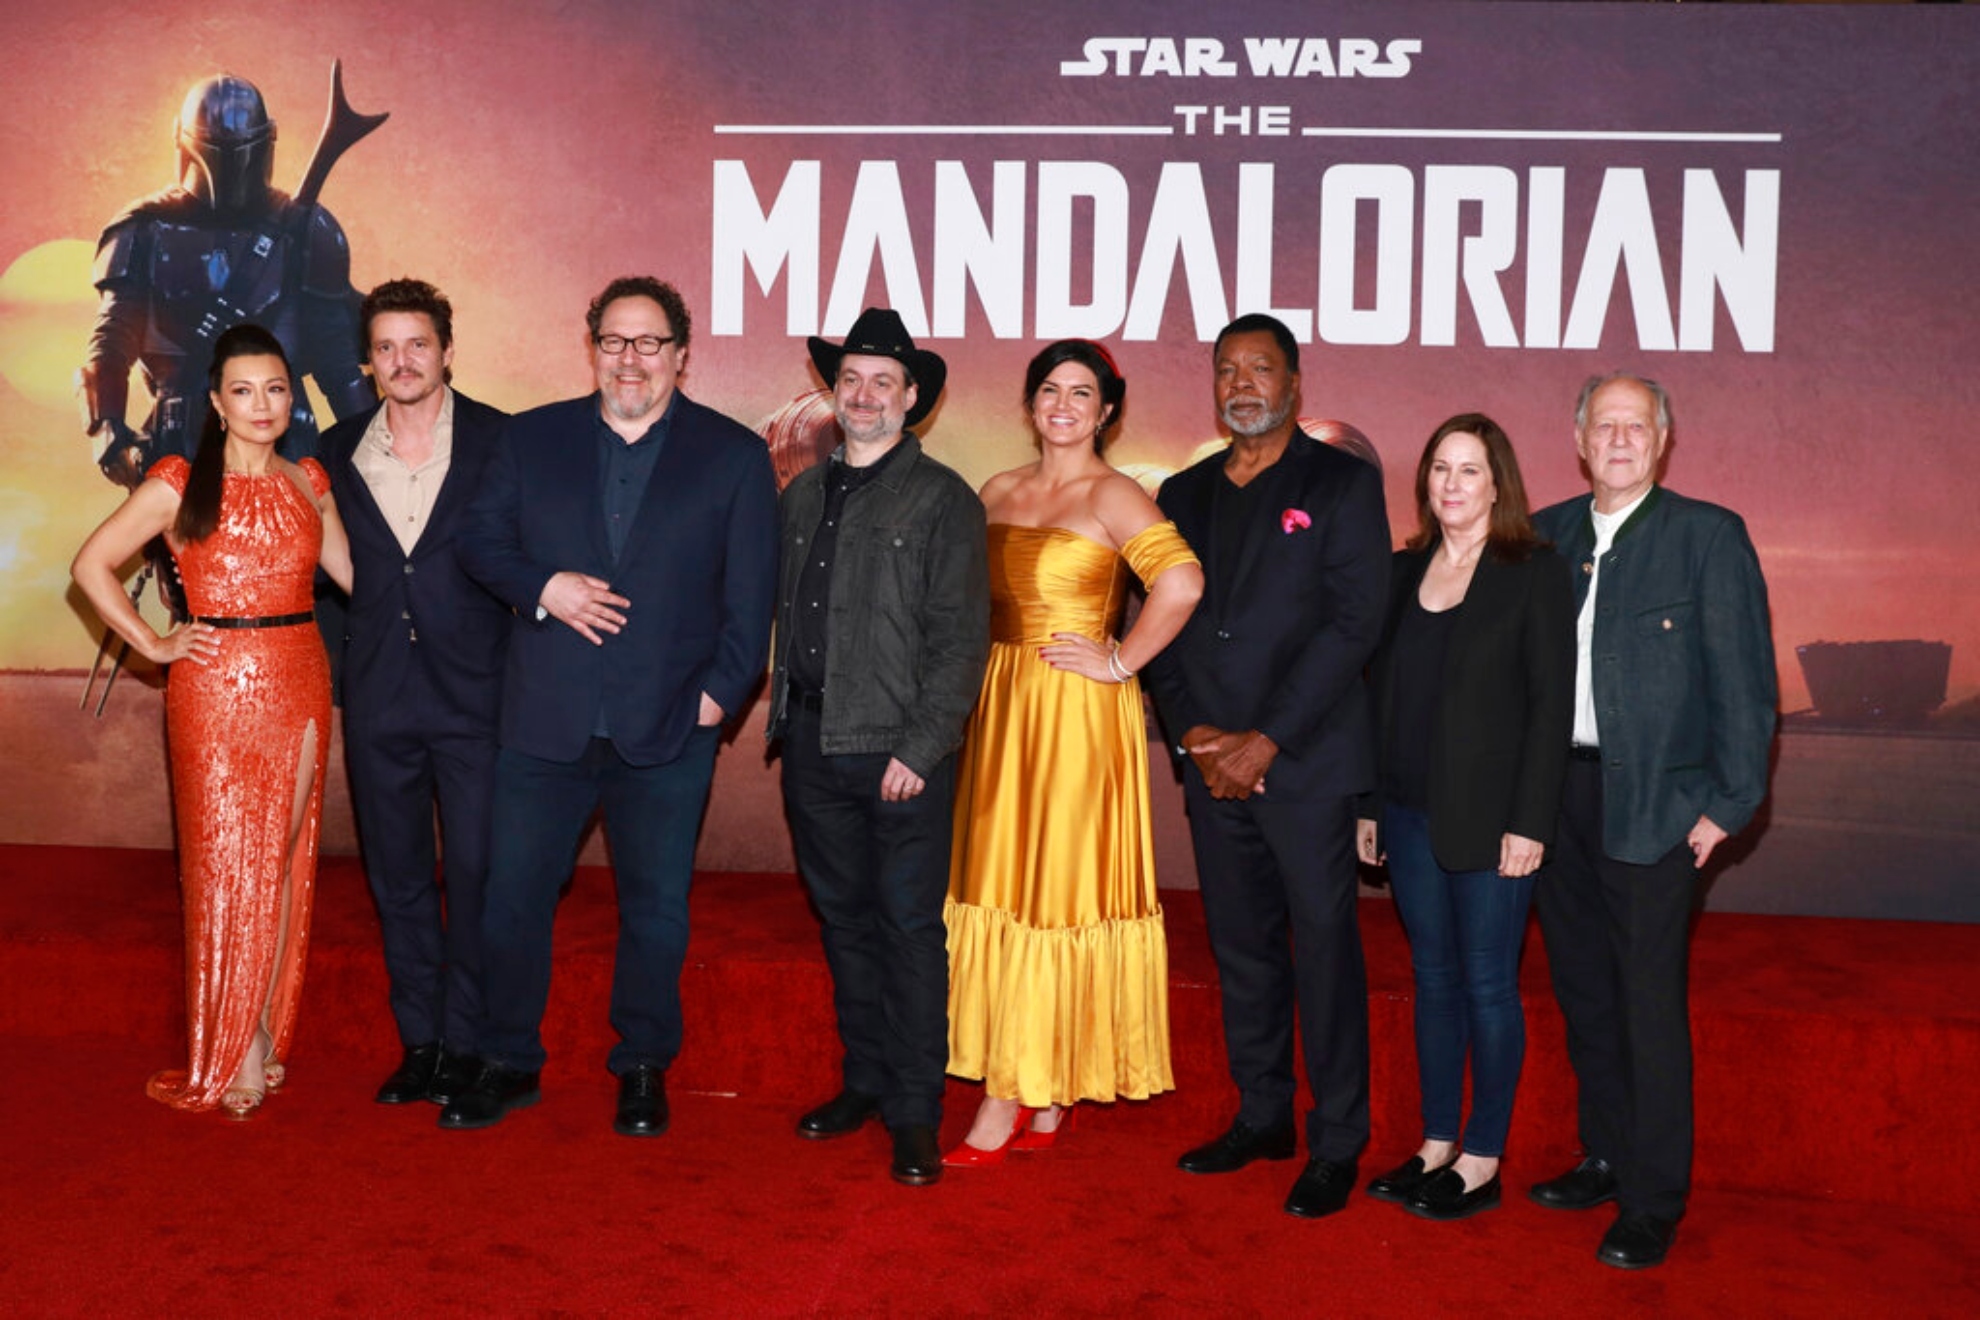 The Mandalorian cast members, including Pedro Pascal, honor the late Carl Weathers